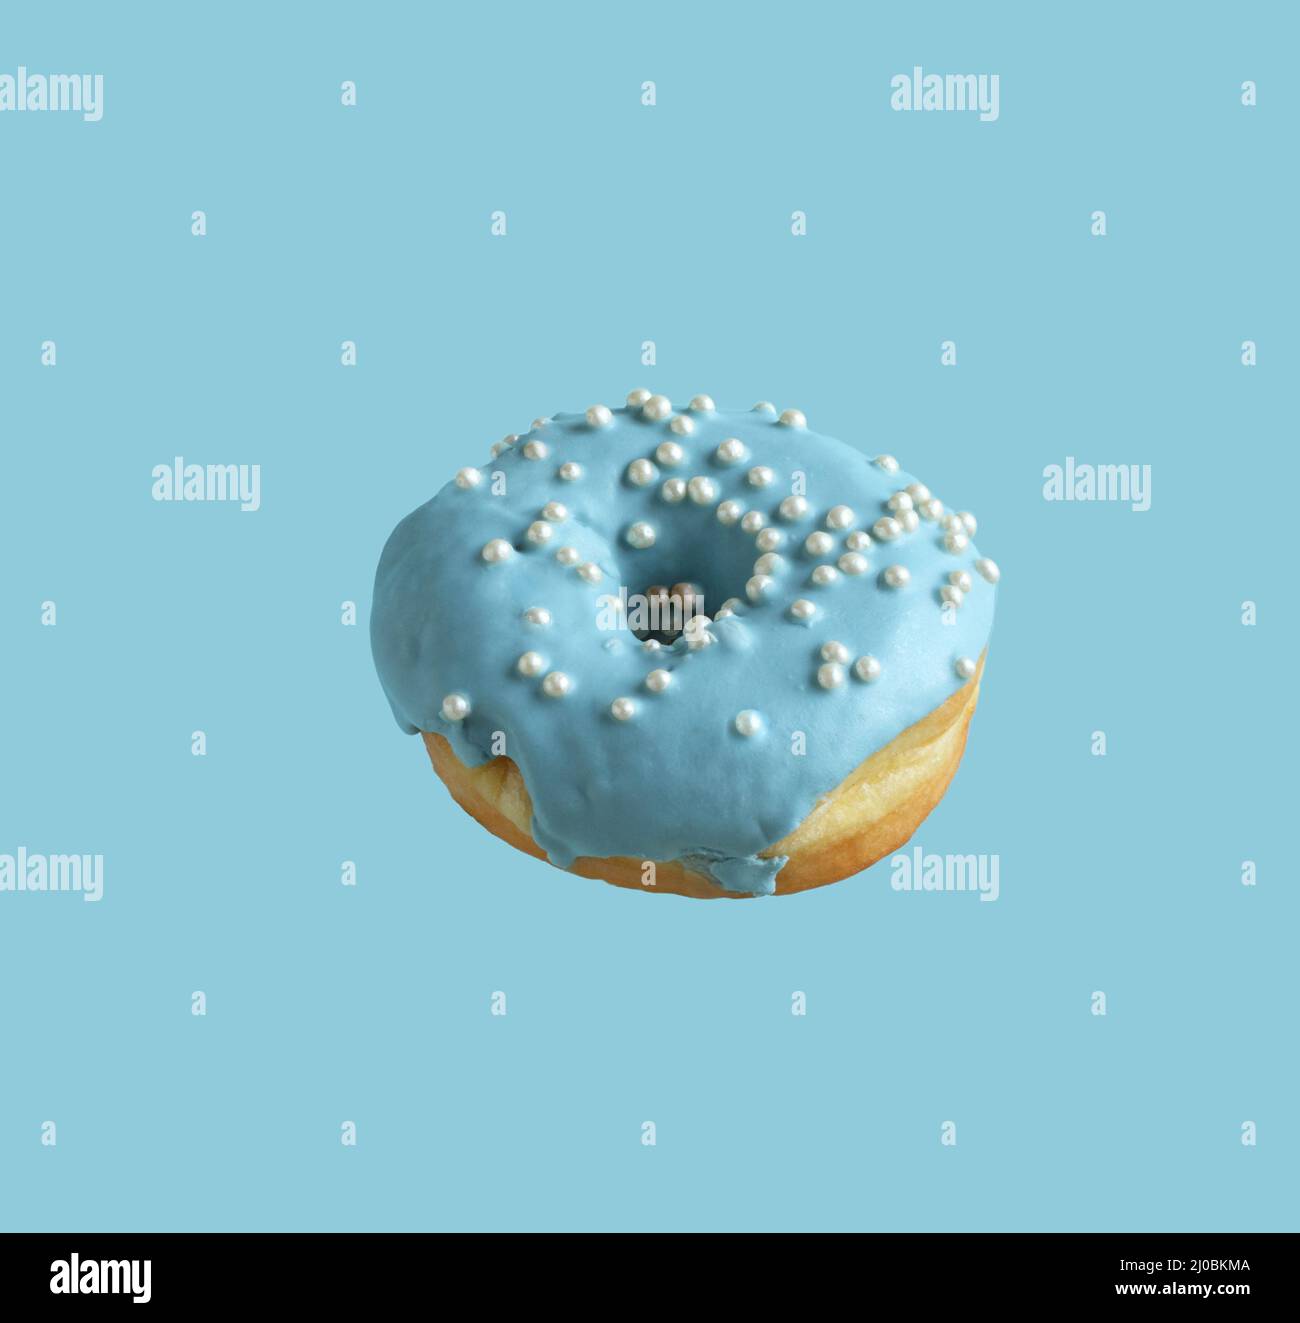 Donuts covered with pale blue icing and sprinkled with pearl sugar beads on a light blue background. Closeup Stock Photo